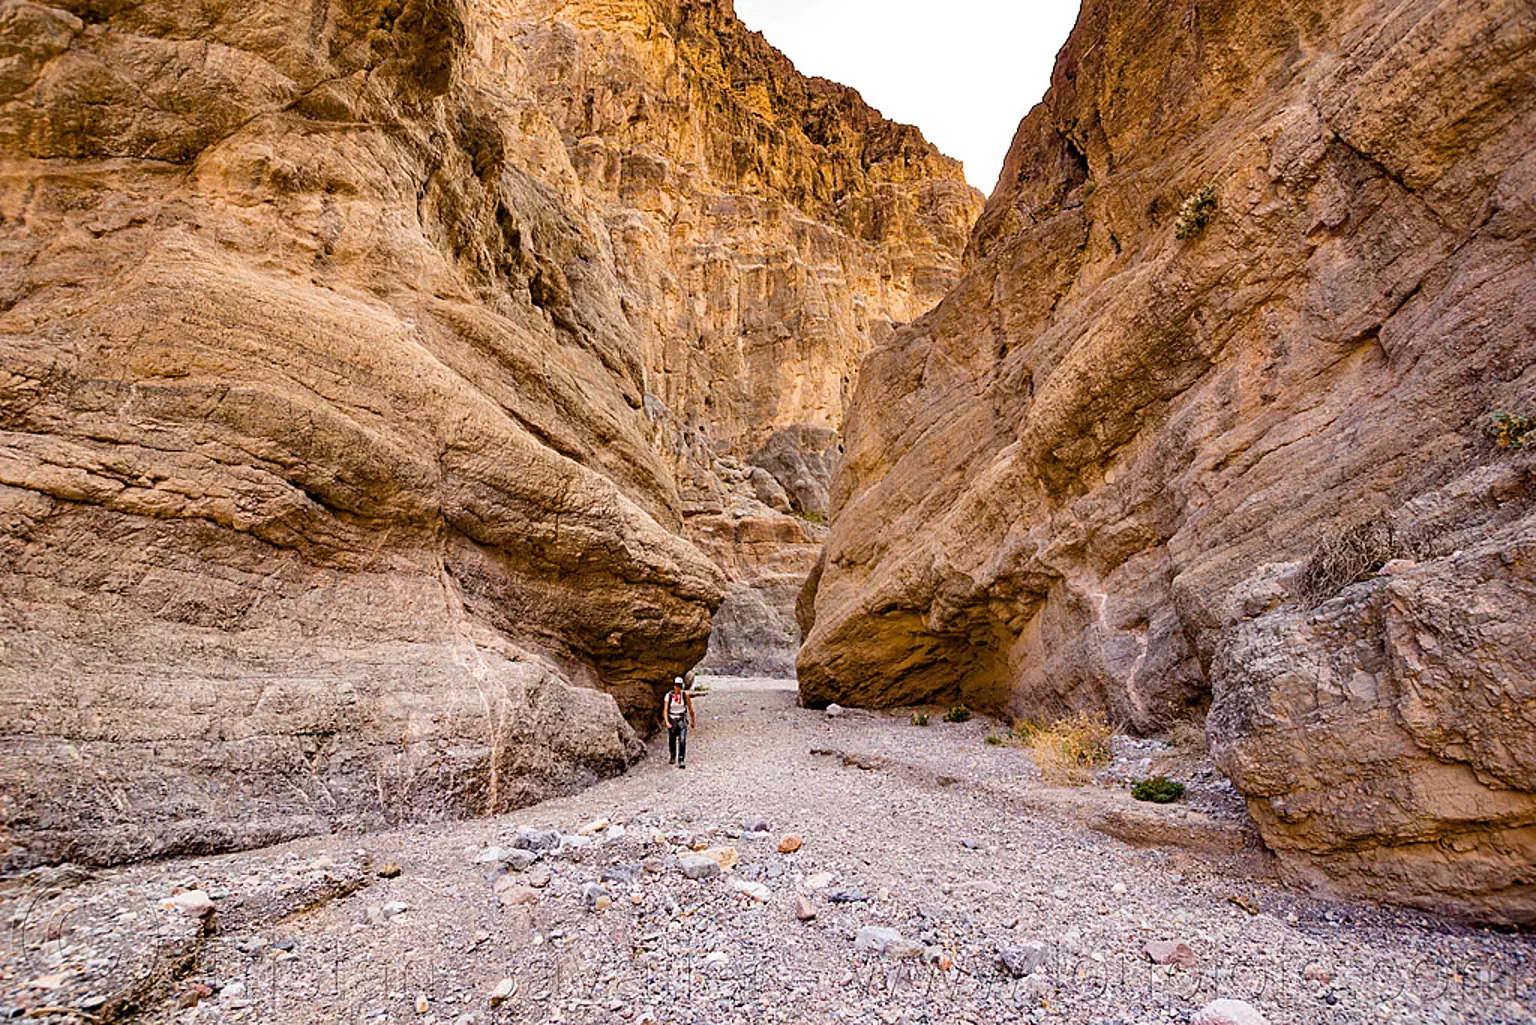 fall canyon - hiking in death valley national park (california), death valley, fall canyon, hiking